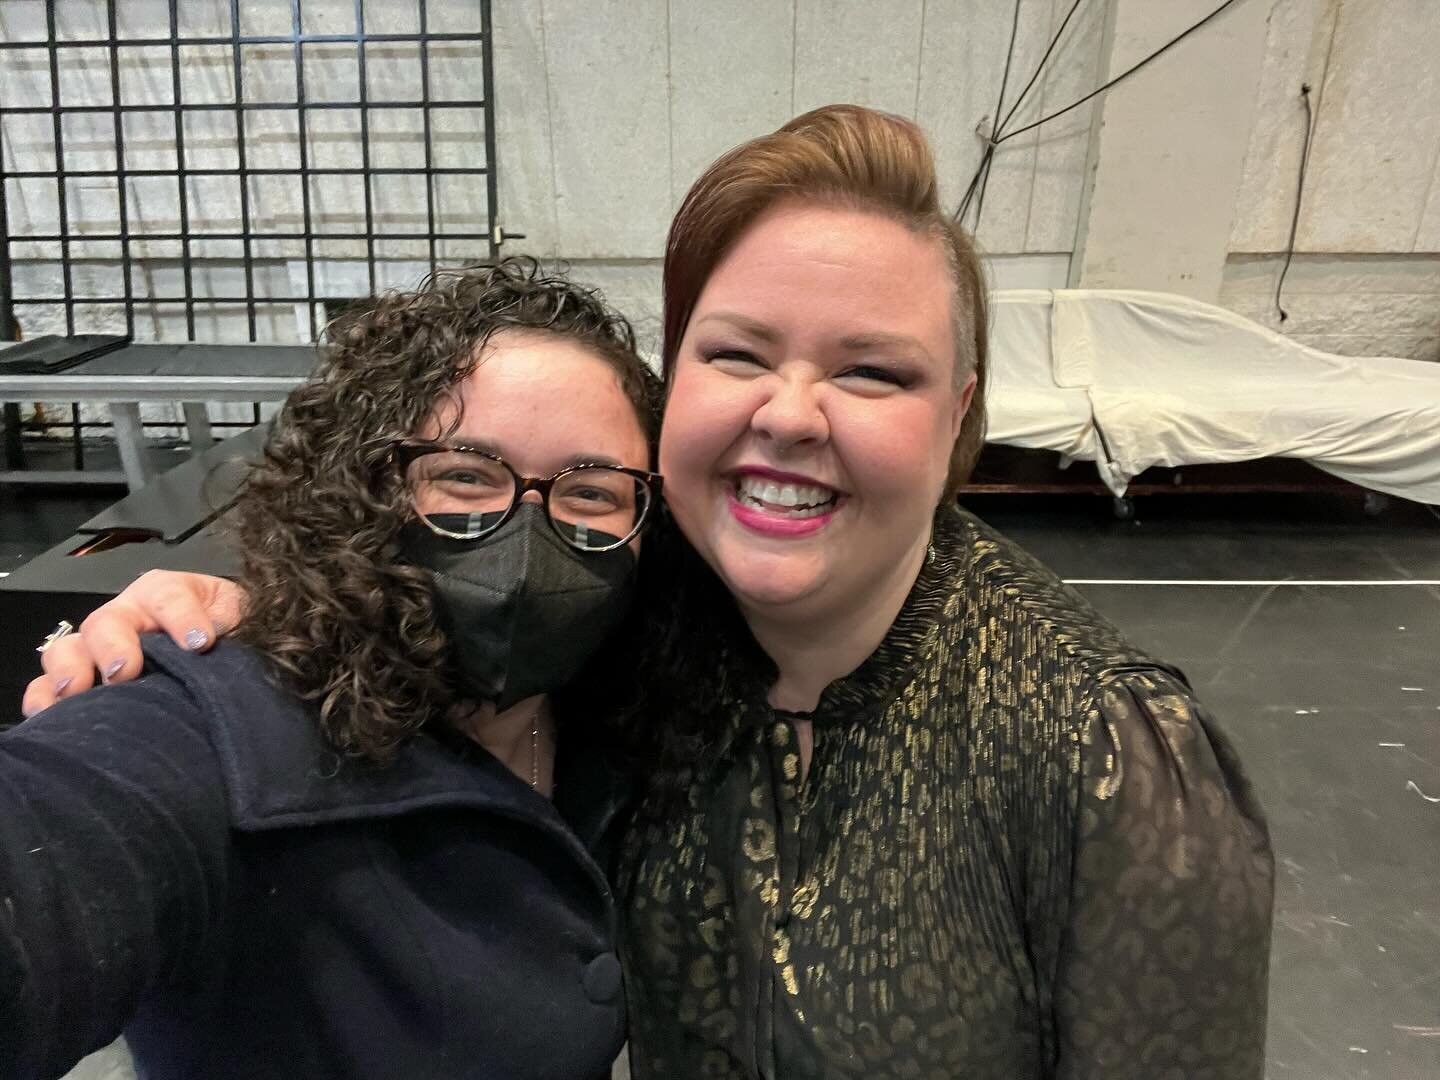 Can&rsquo;t believe I get to sing on the same stage as @jbartonmezzo !!! Being in the same room as her is just electric, and hearing her voice live, leaves me starstruck! #mezzo #contralto #opera #operasingersofinstagram @lyricopera @lyricoperastagea